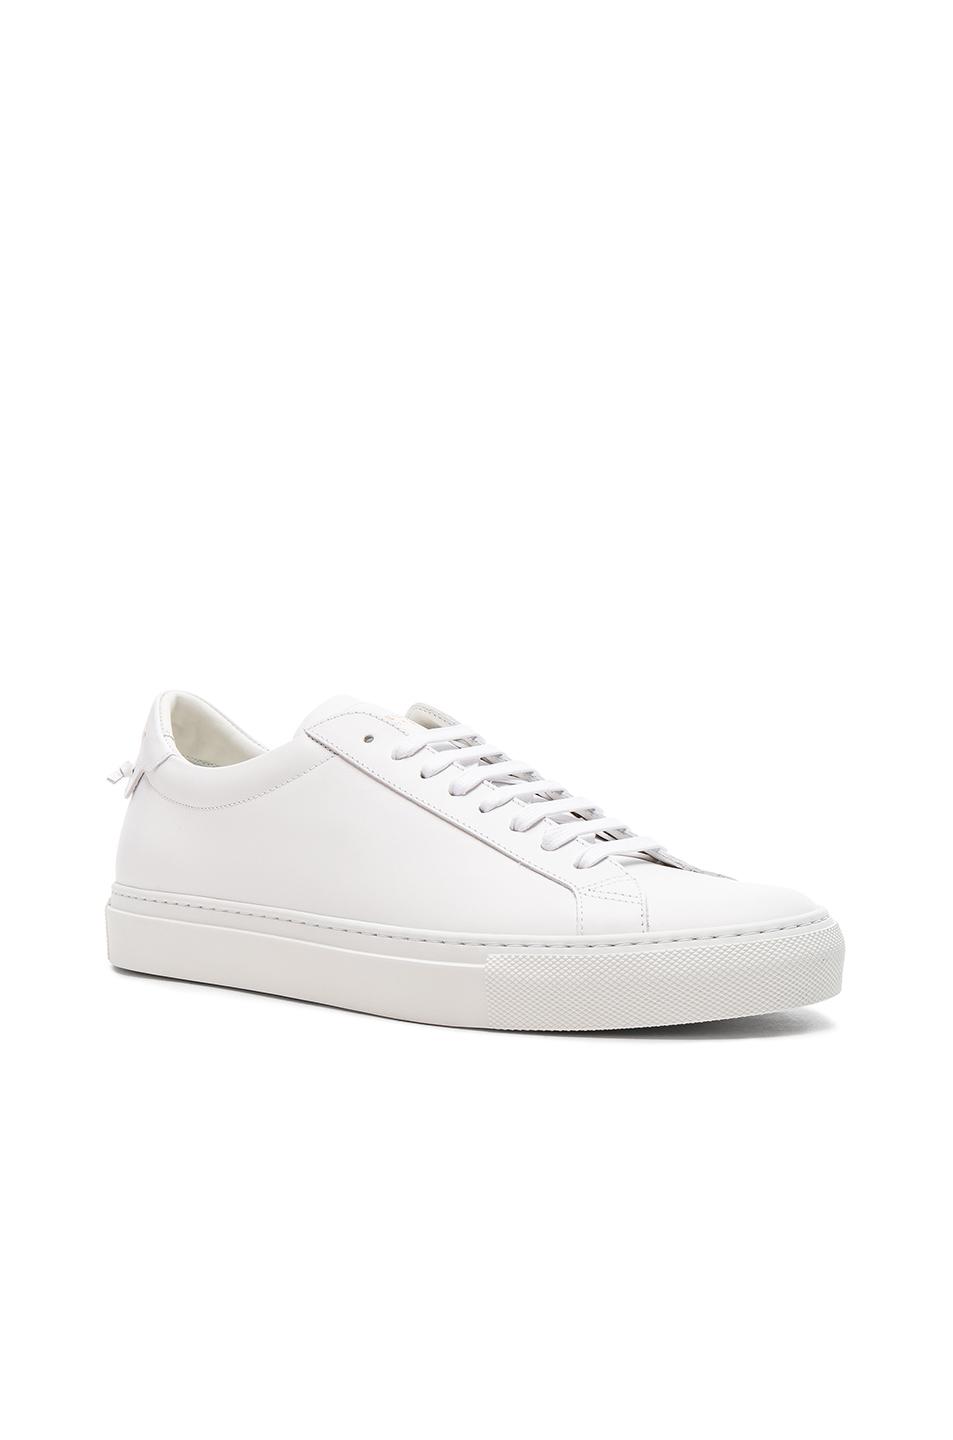 givenchy urban knot sneakers